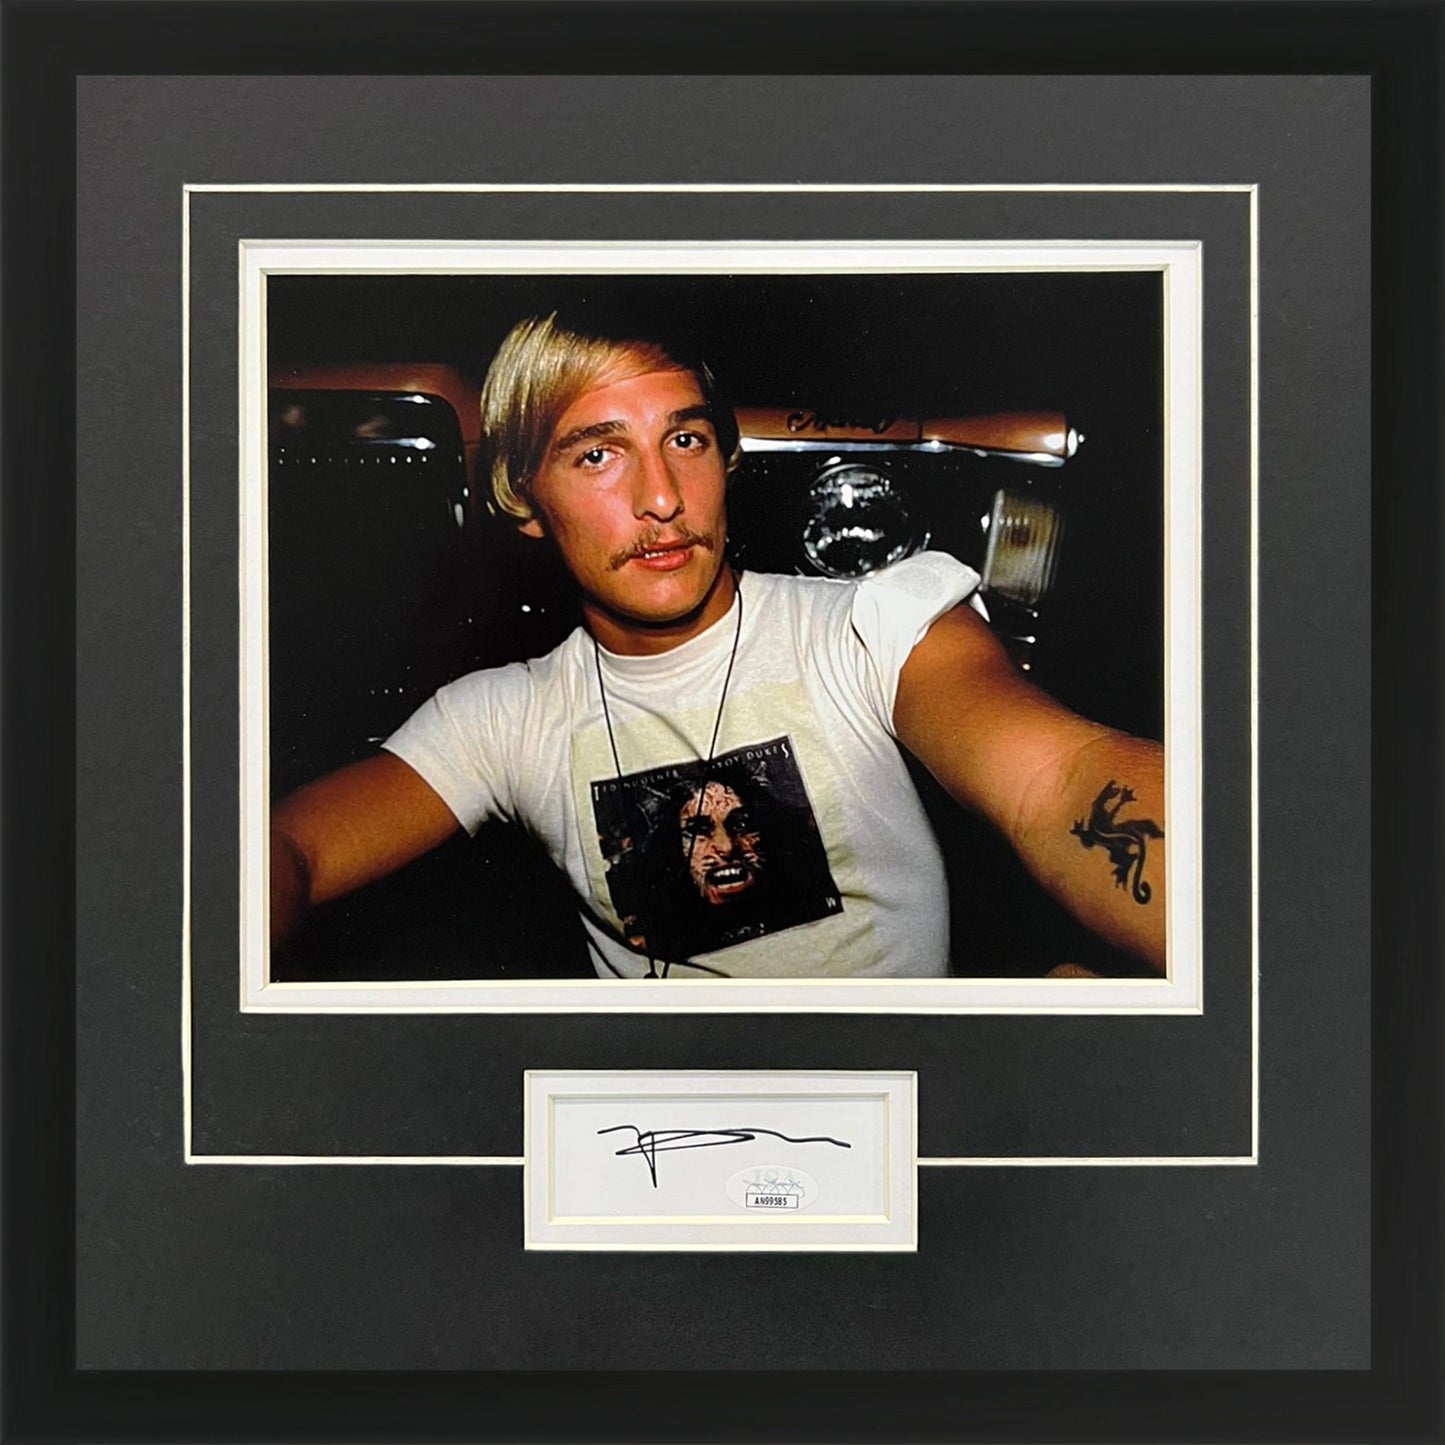 Matthew McConaughey Autographed Dazed and Confused "Signature Series" Frame - JSA